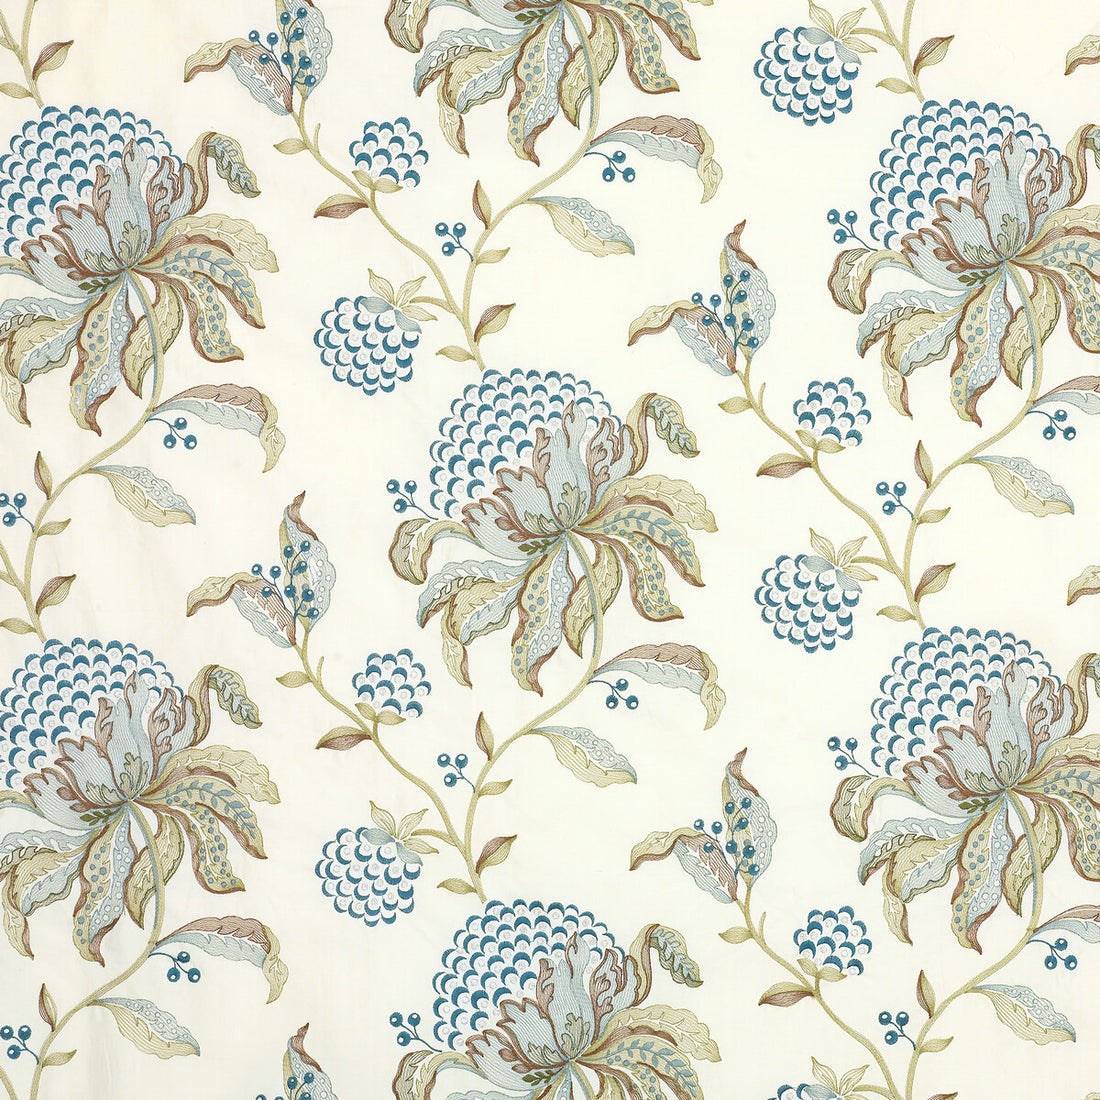 Silwood fabric in teal/green color - pattern BF10501.2.0 - by G P &amp; J Baker in the Larkhill collection